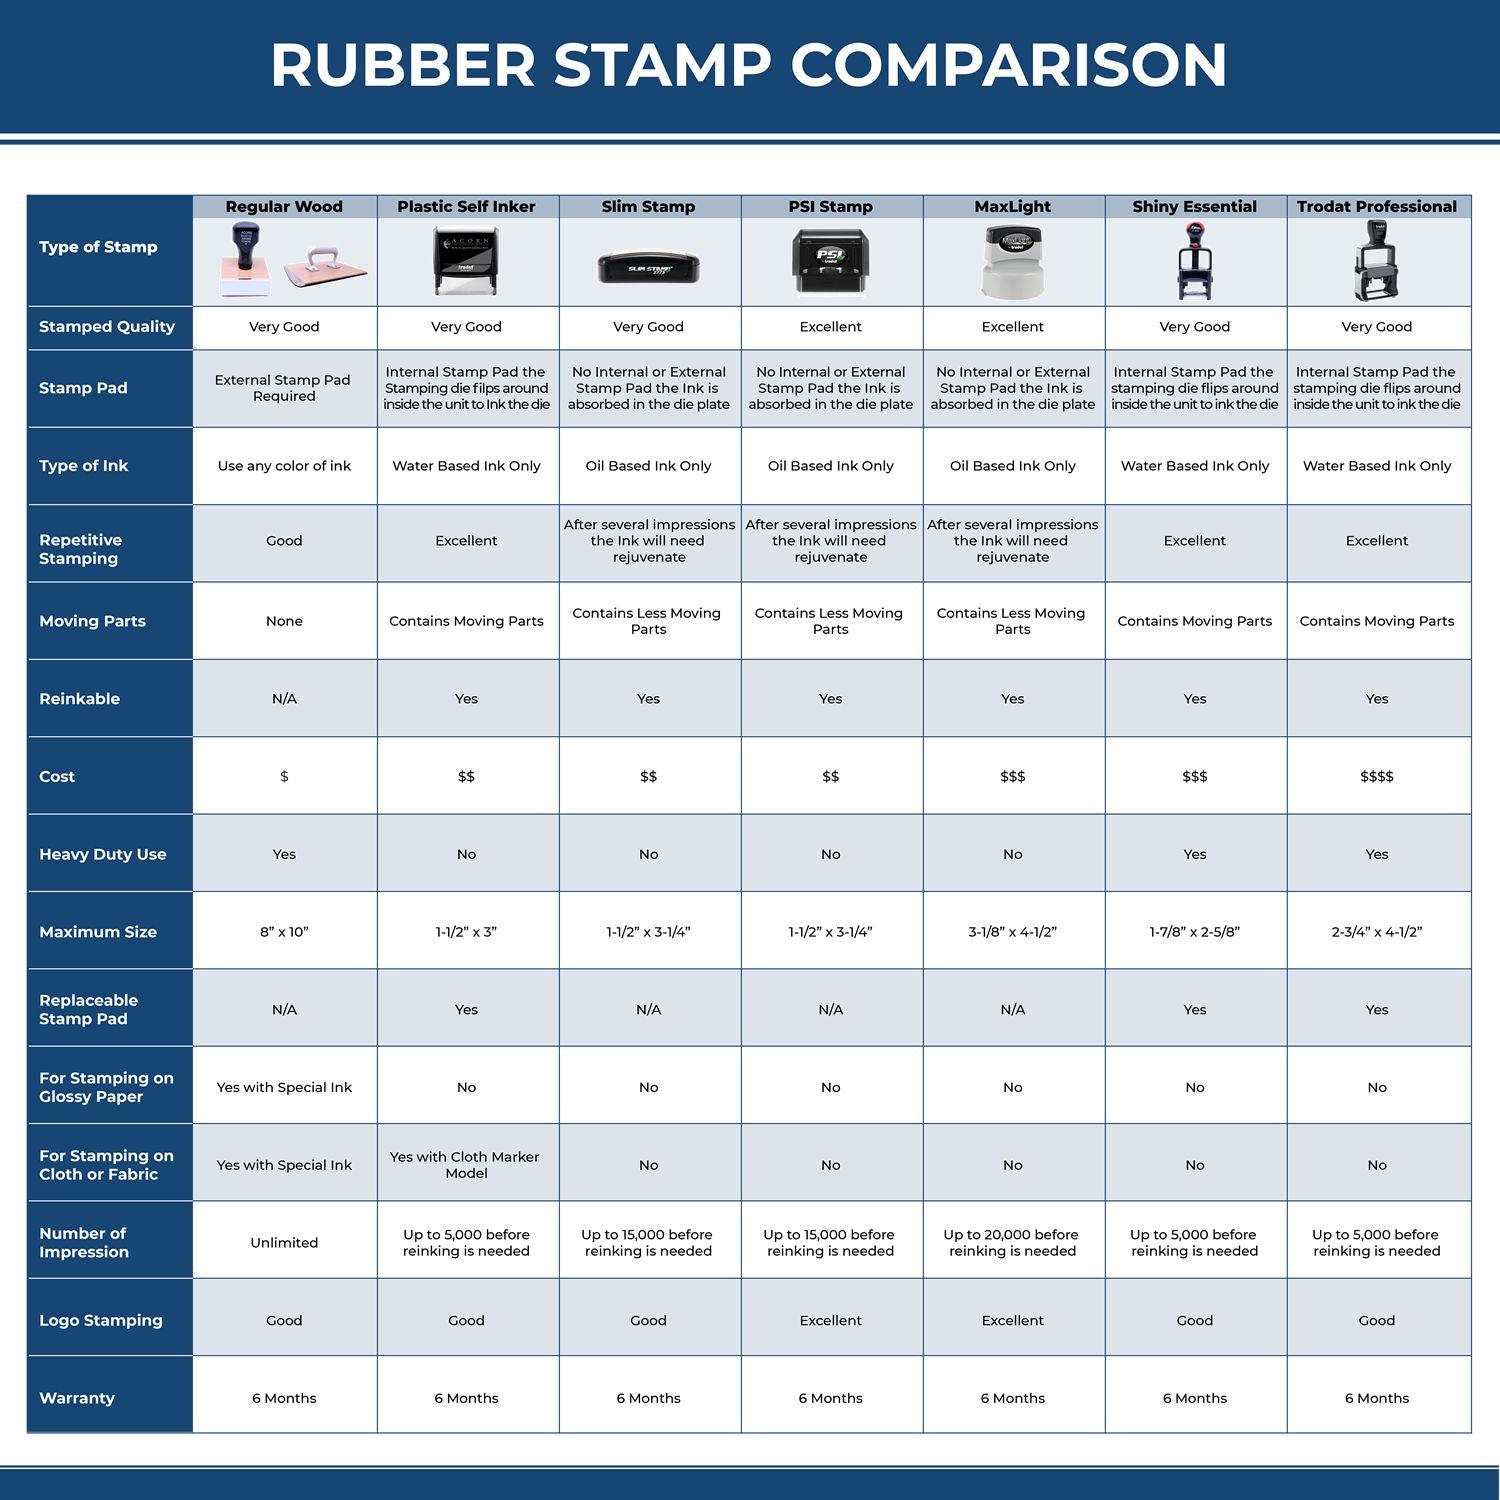 Large Self-Inking Attorneys' Copy Stamp 4881S Rubber Stamp Comparison